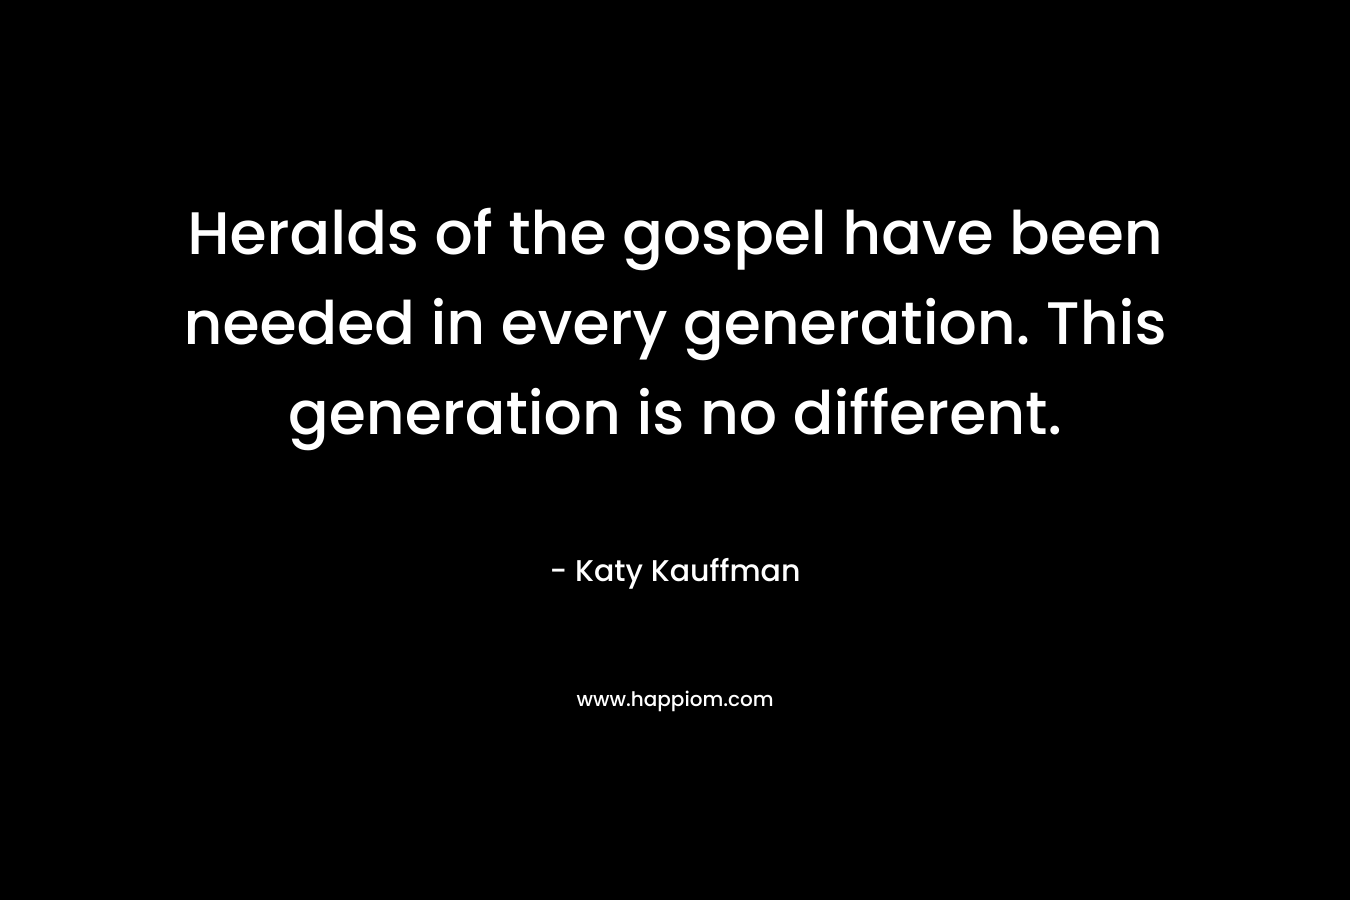 Heralds of the gospel have been needed in every generation. This generation is no different.